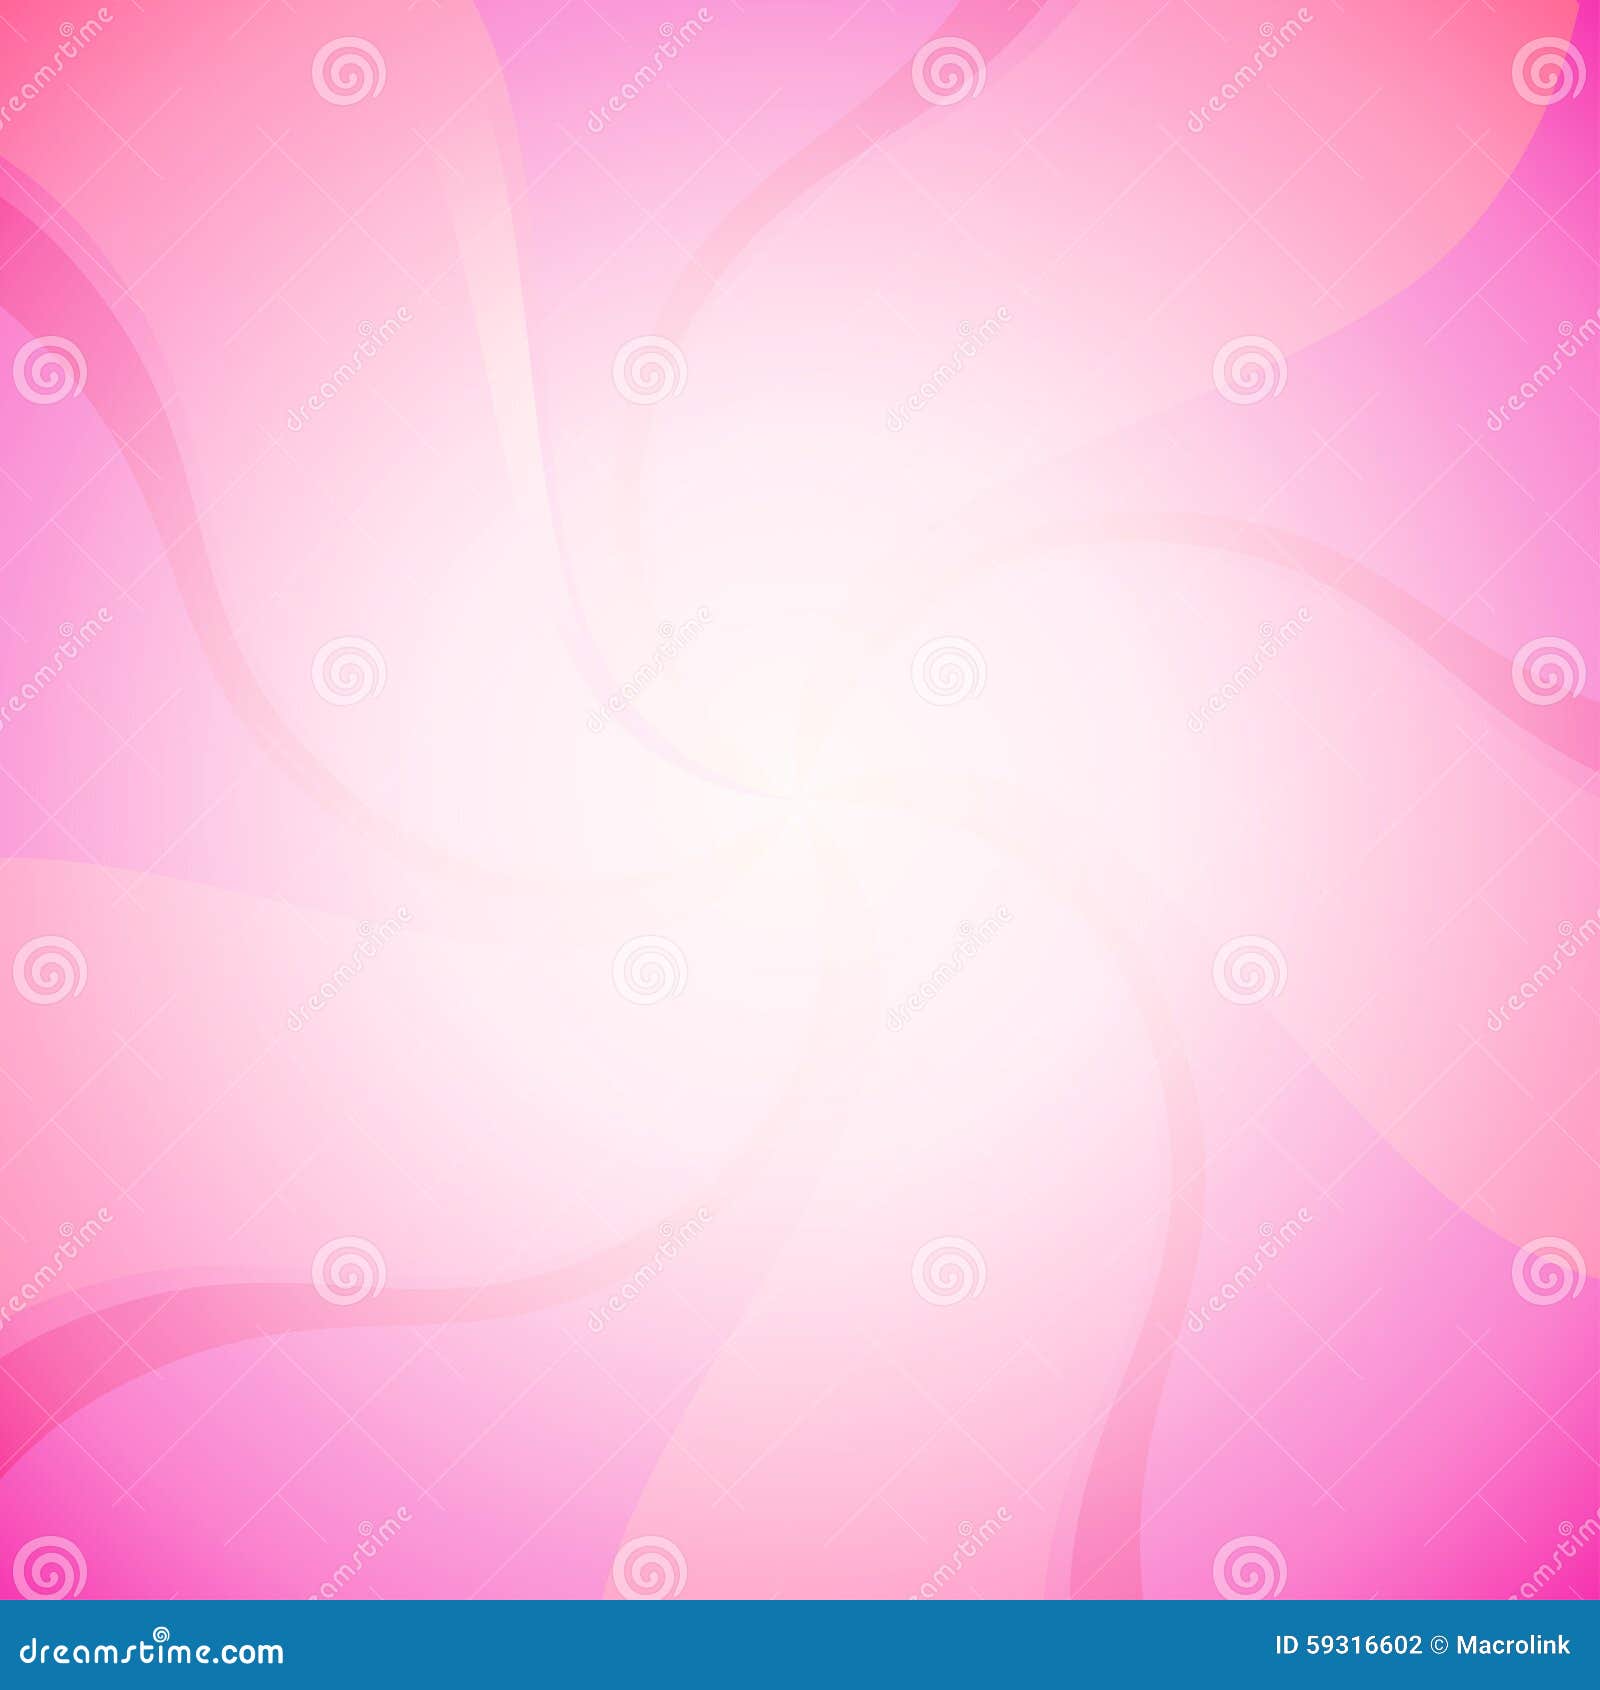 Light Rose Background with Spiral Ornament Stock Vector - Illustration of  shiny, magenta: 59316602